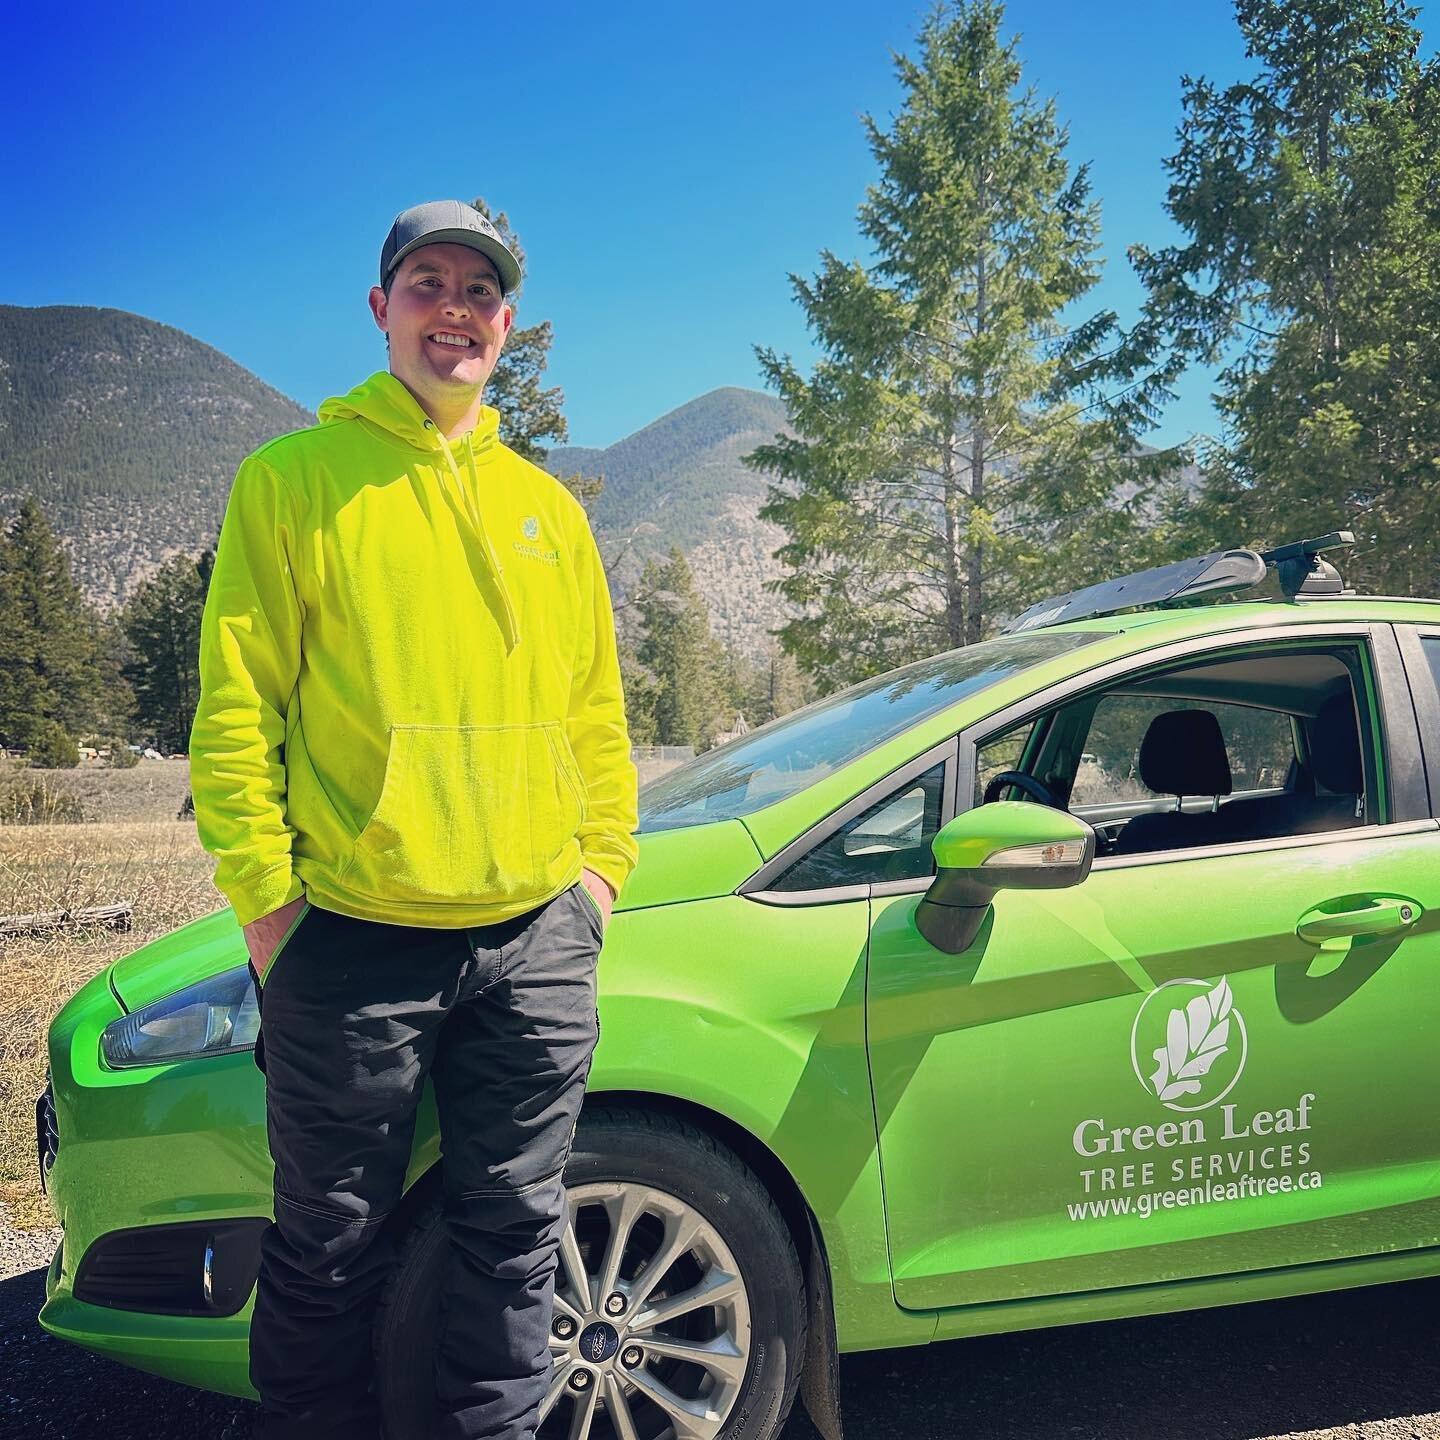 Meet Marcus Sherry. Marcus is the newest member to our team filling the role as an Arborist Representative for the southern Columbia Valley. Marcus has a diverse background in the tree care industry as a Certified Arborist, Certified Tree Risk Assess